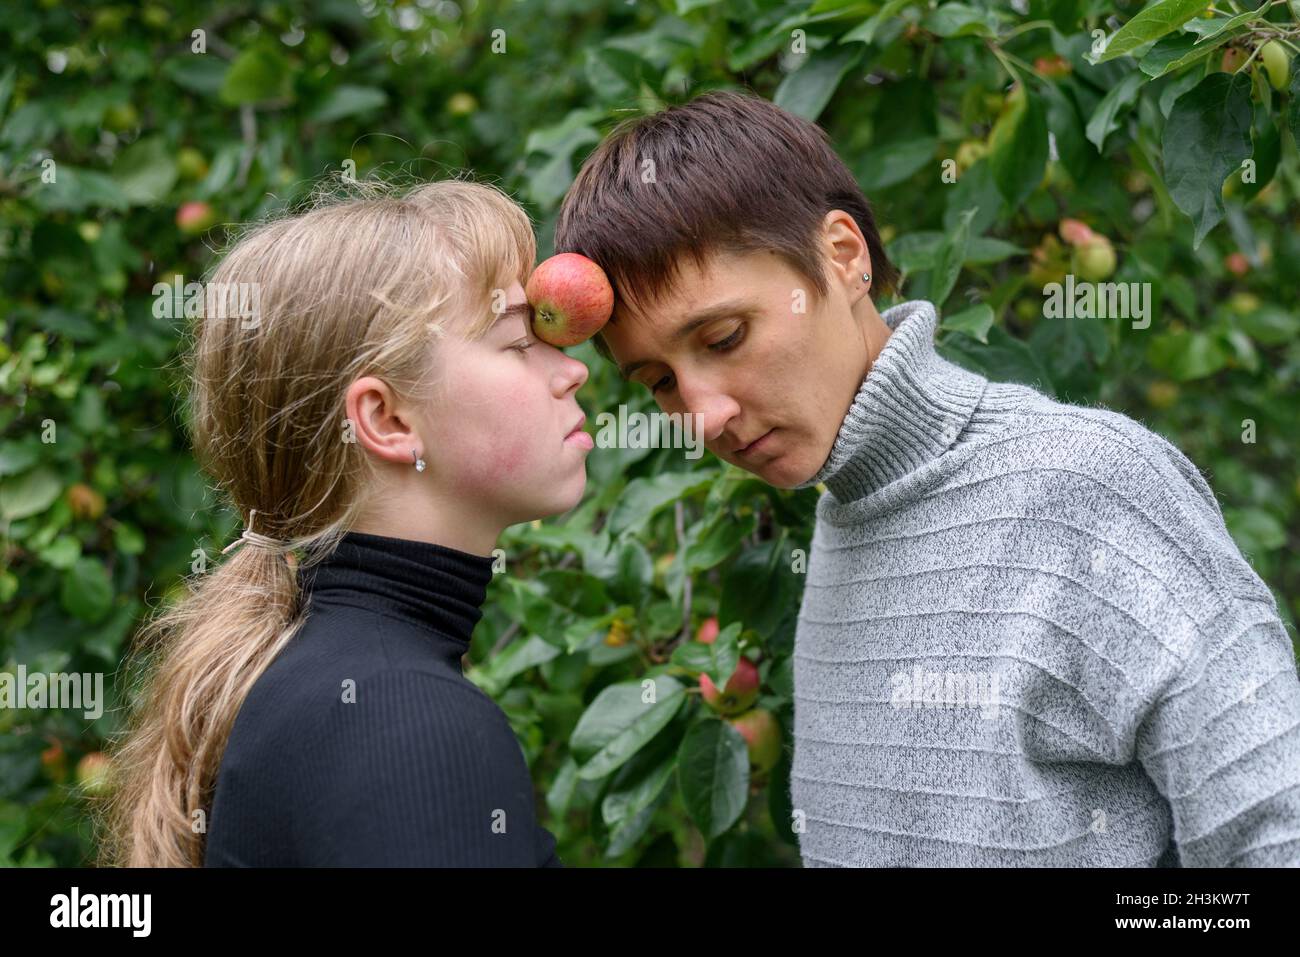 Two women holding an apple between foreheads during dance improvisation outdoors Stock Photo